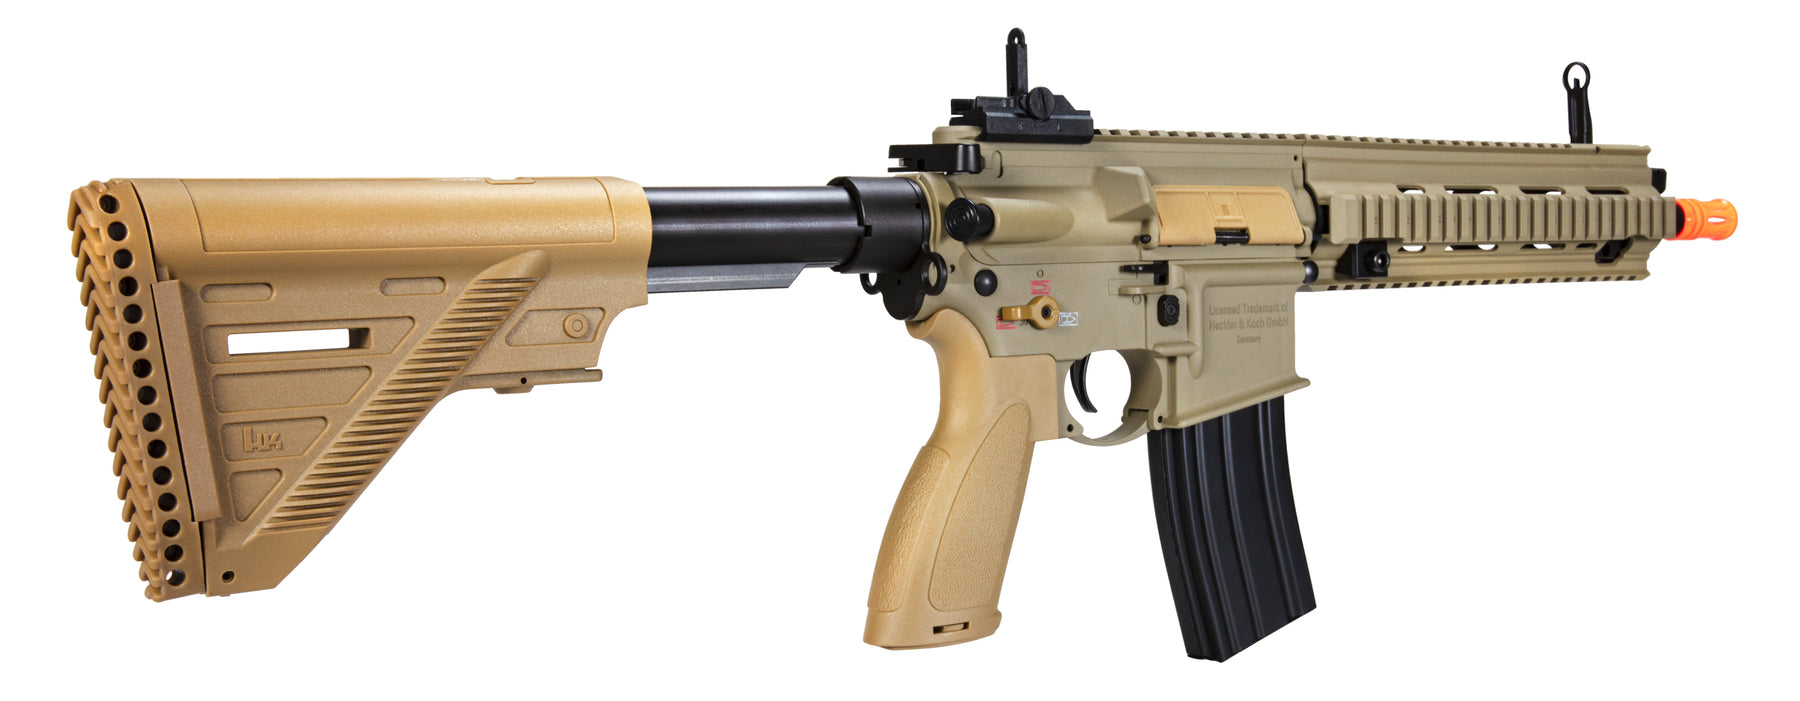 Umarex HK 416 A5 Comp AEG BB Green/Brown Airsoft Rifle (2275057) with –  Sports and Gadgets